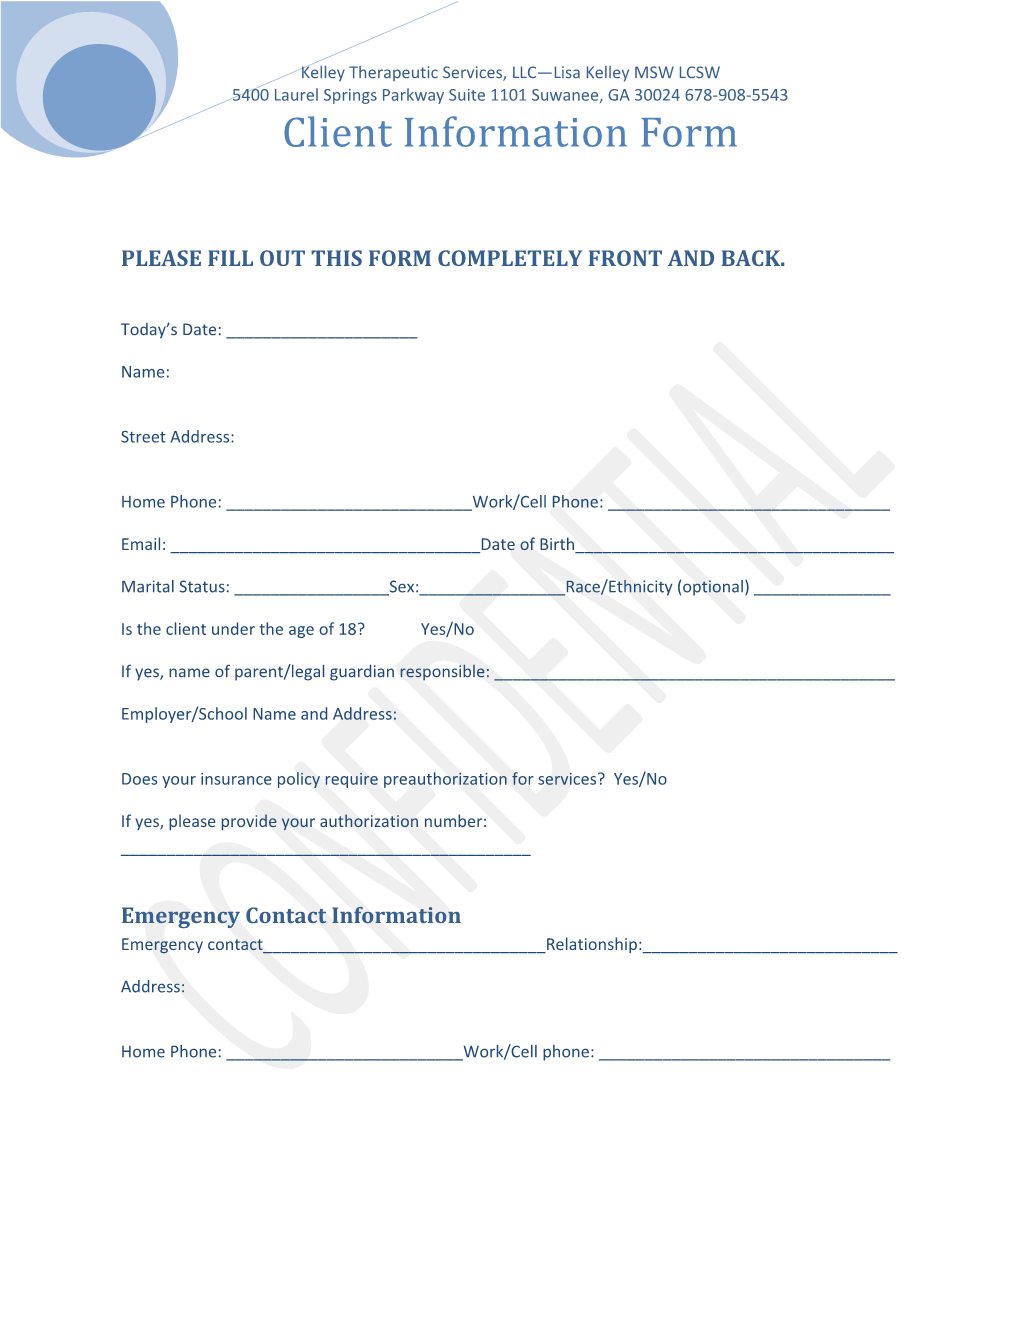 Please Fill out This Form Completely Front and Back